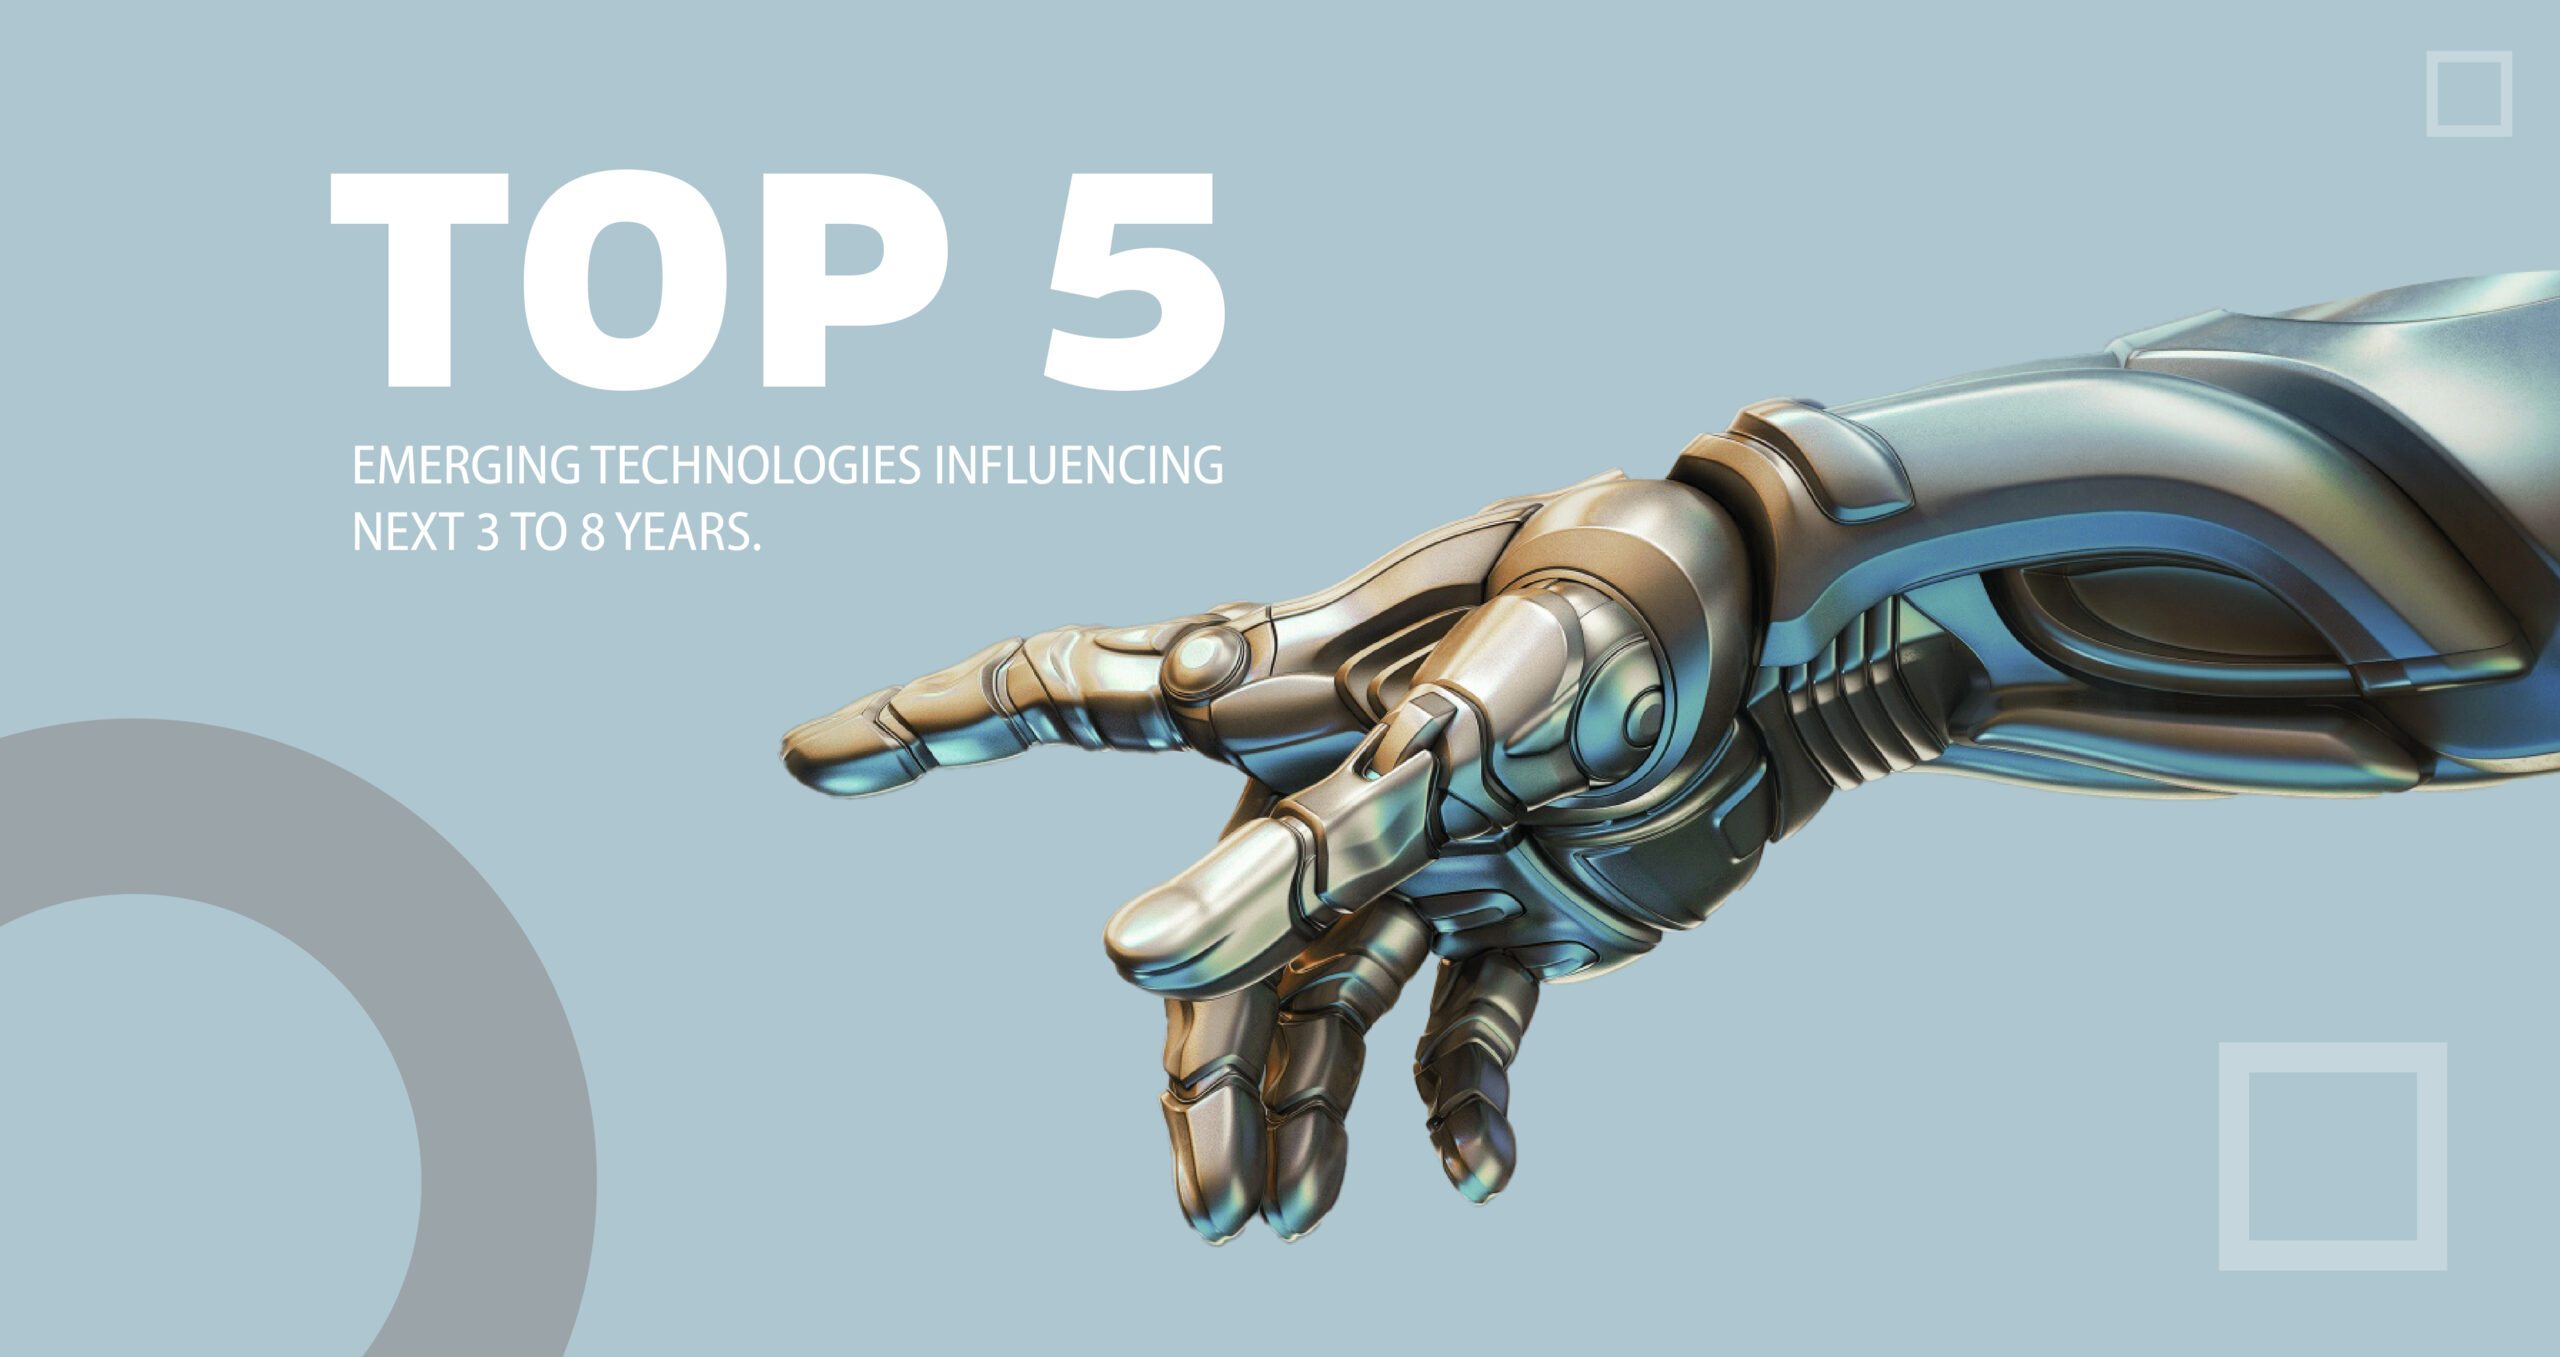 Top 5 Emerging Technologies Influencing Next 3 to 8 Years